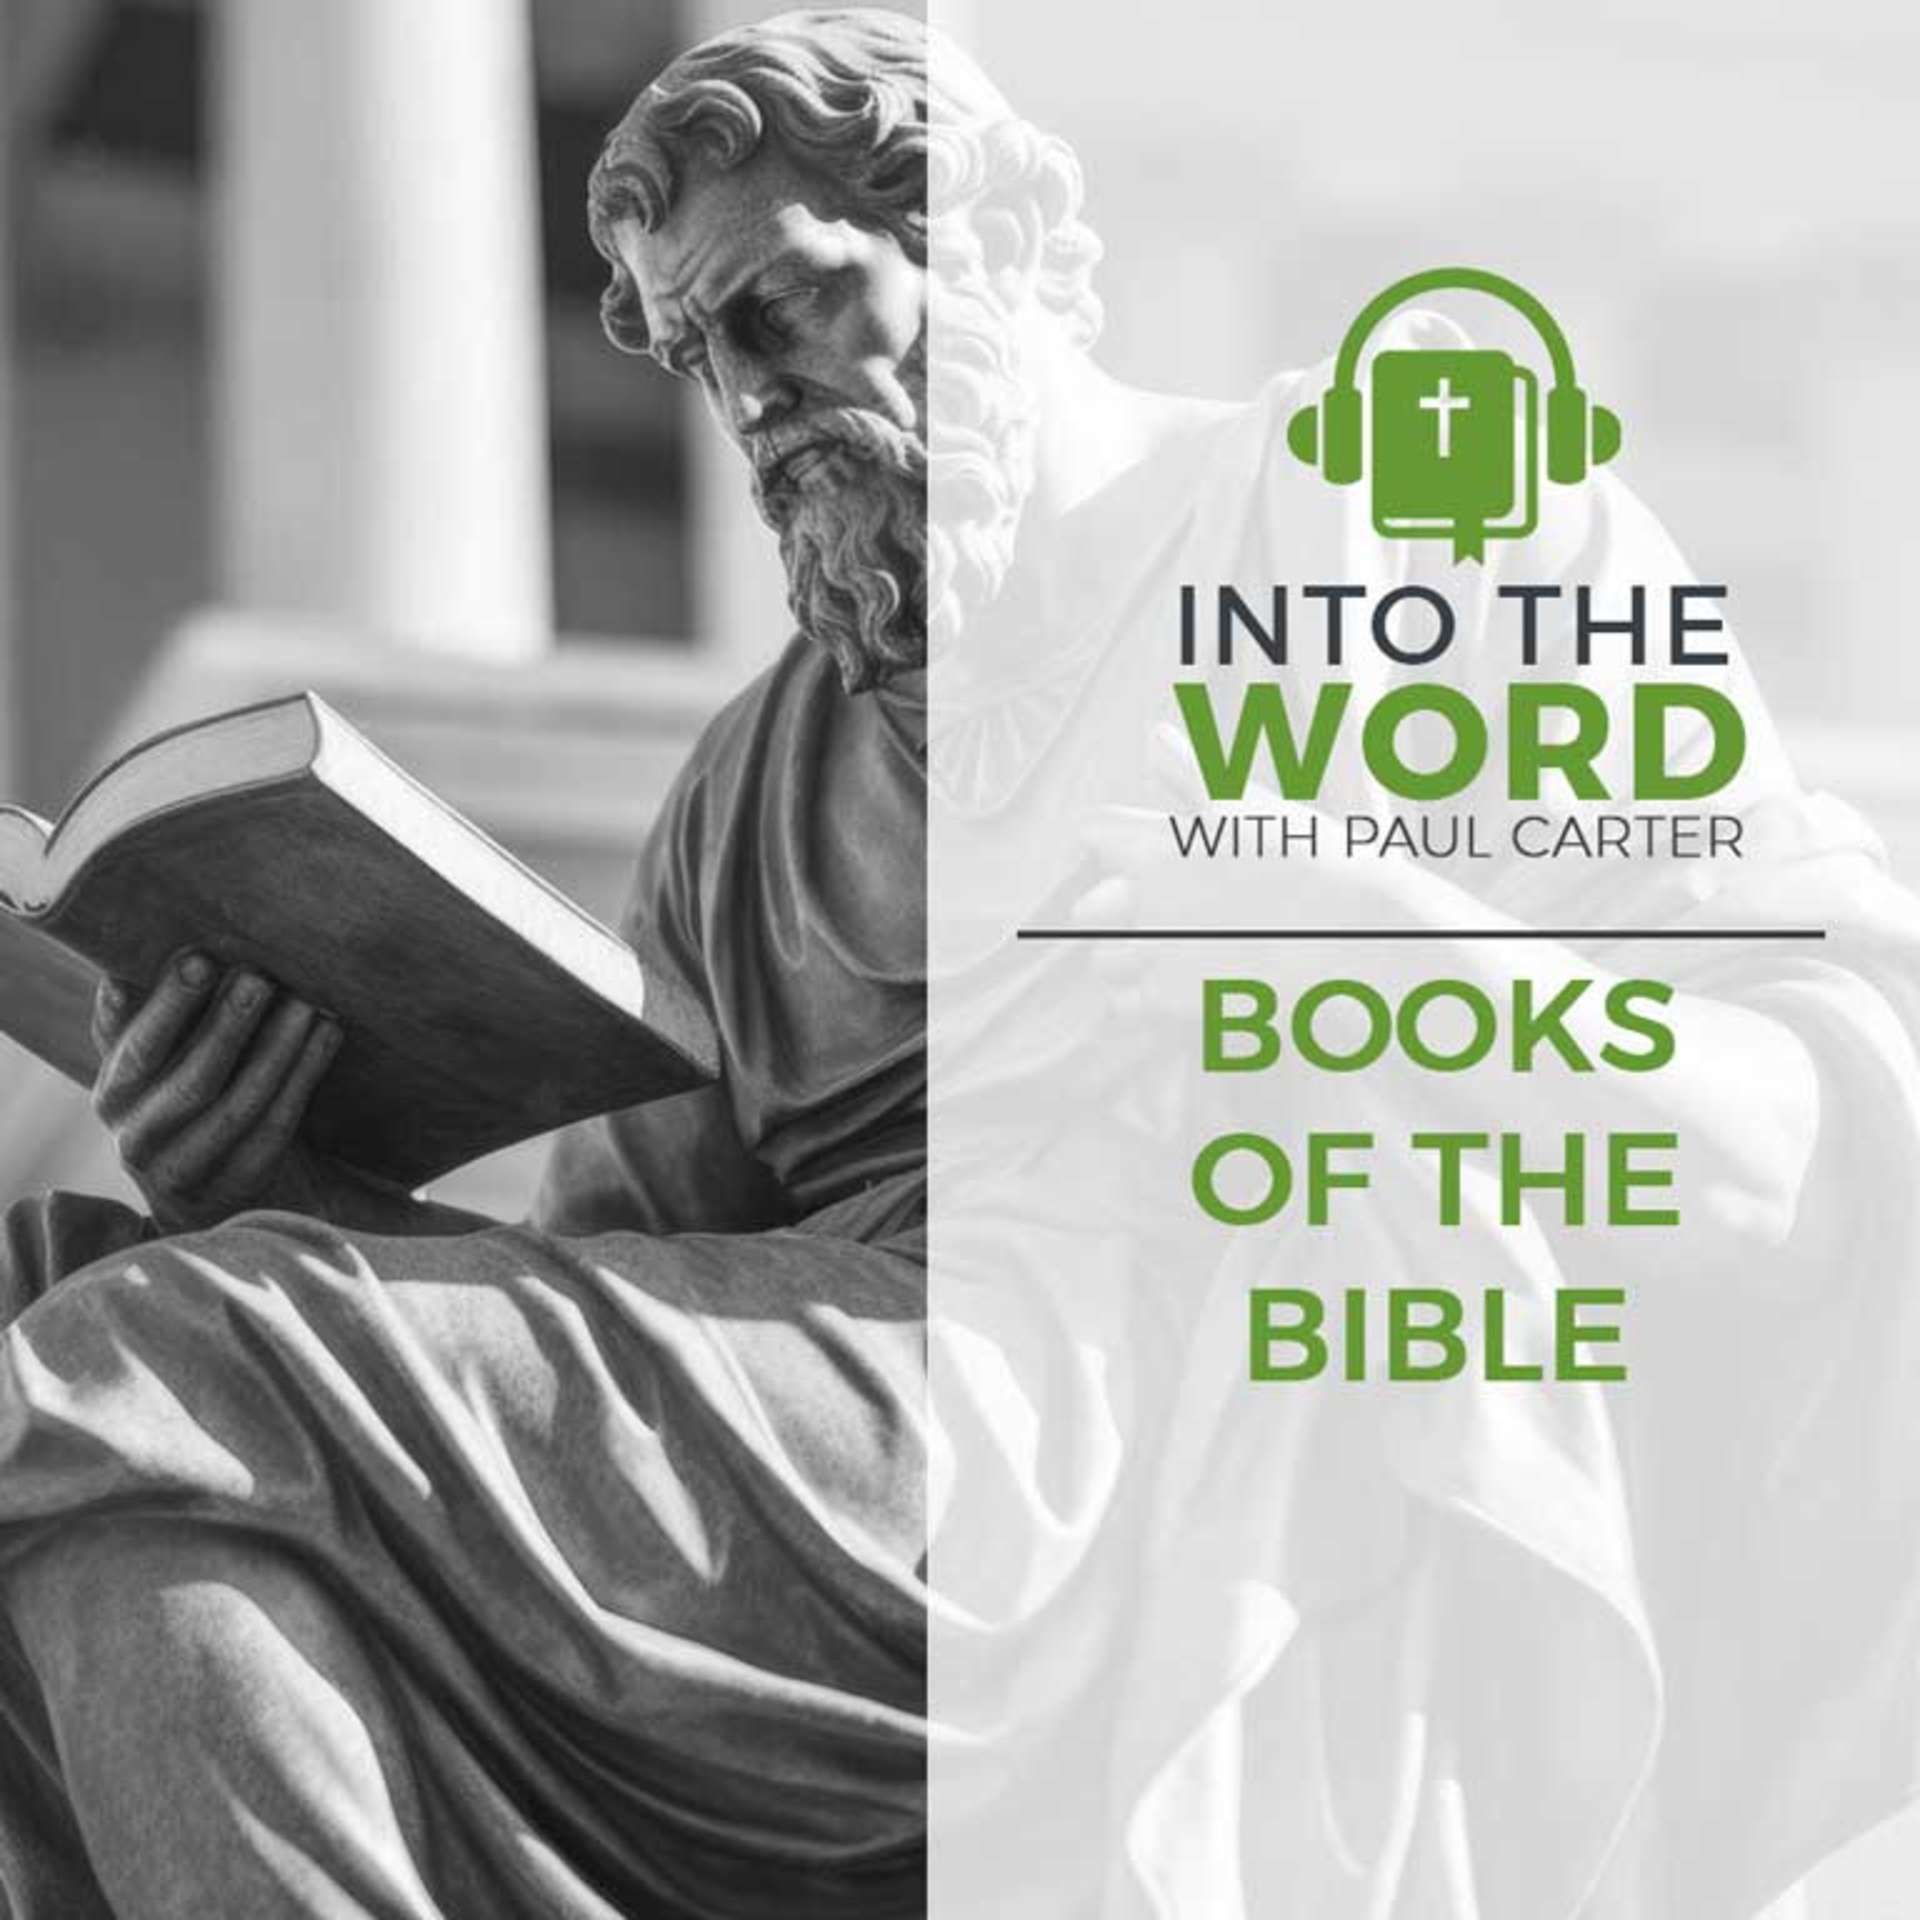 Books of the Bible with Into the Word and Paul Carter